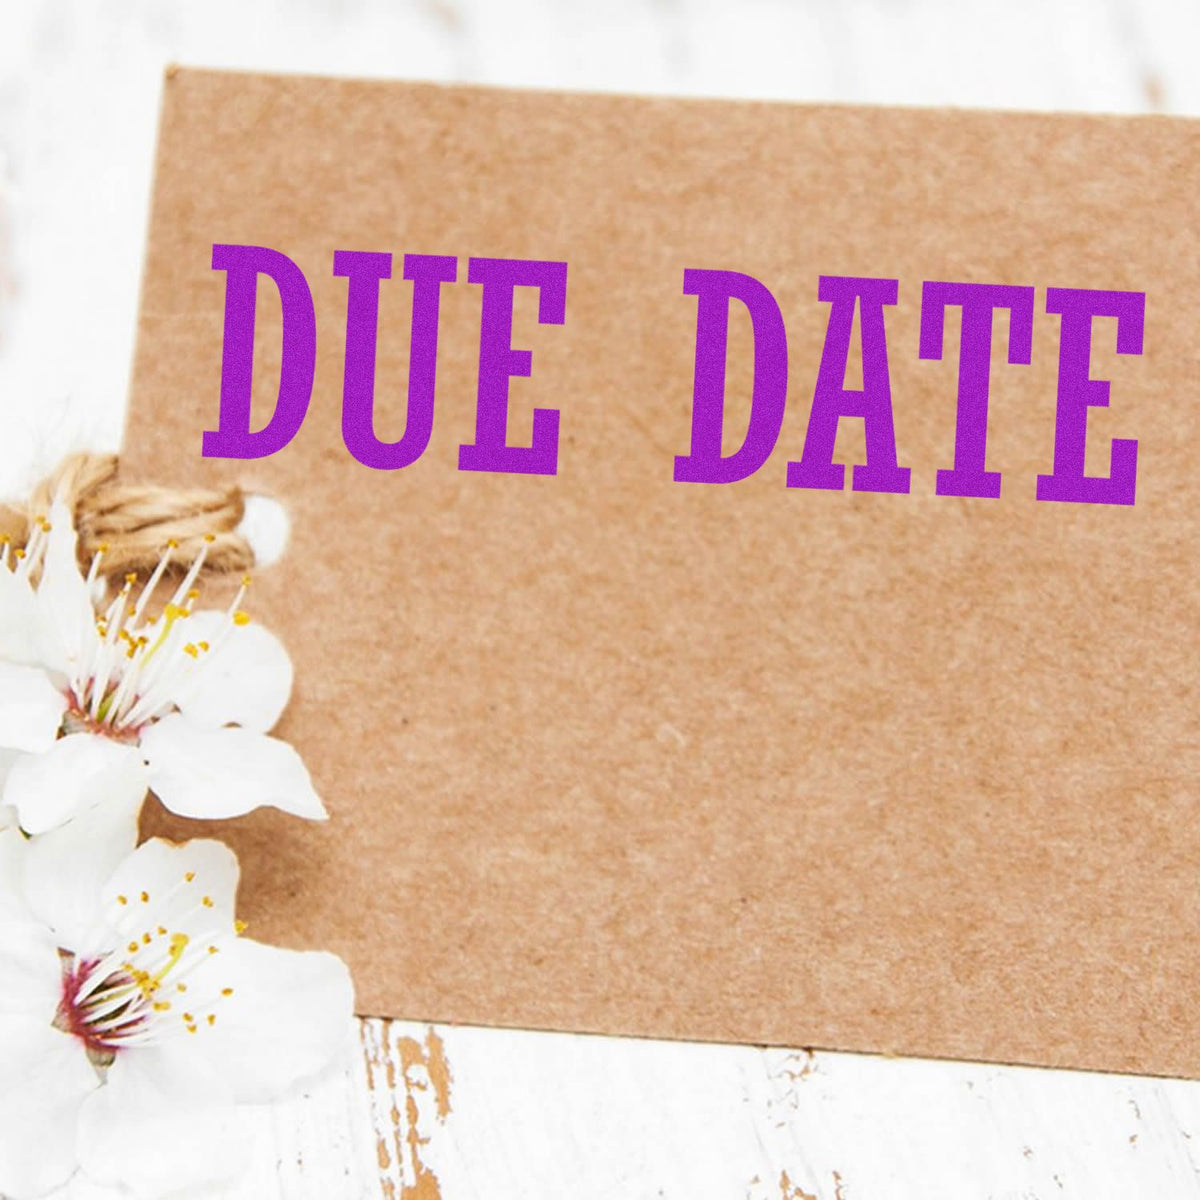 Due Date Rubber Stamp In Use